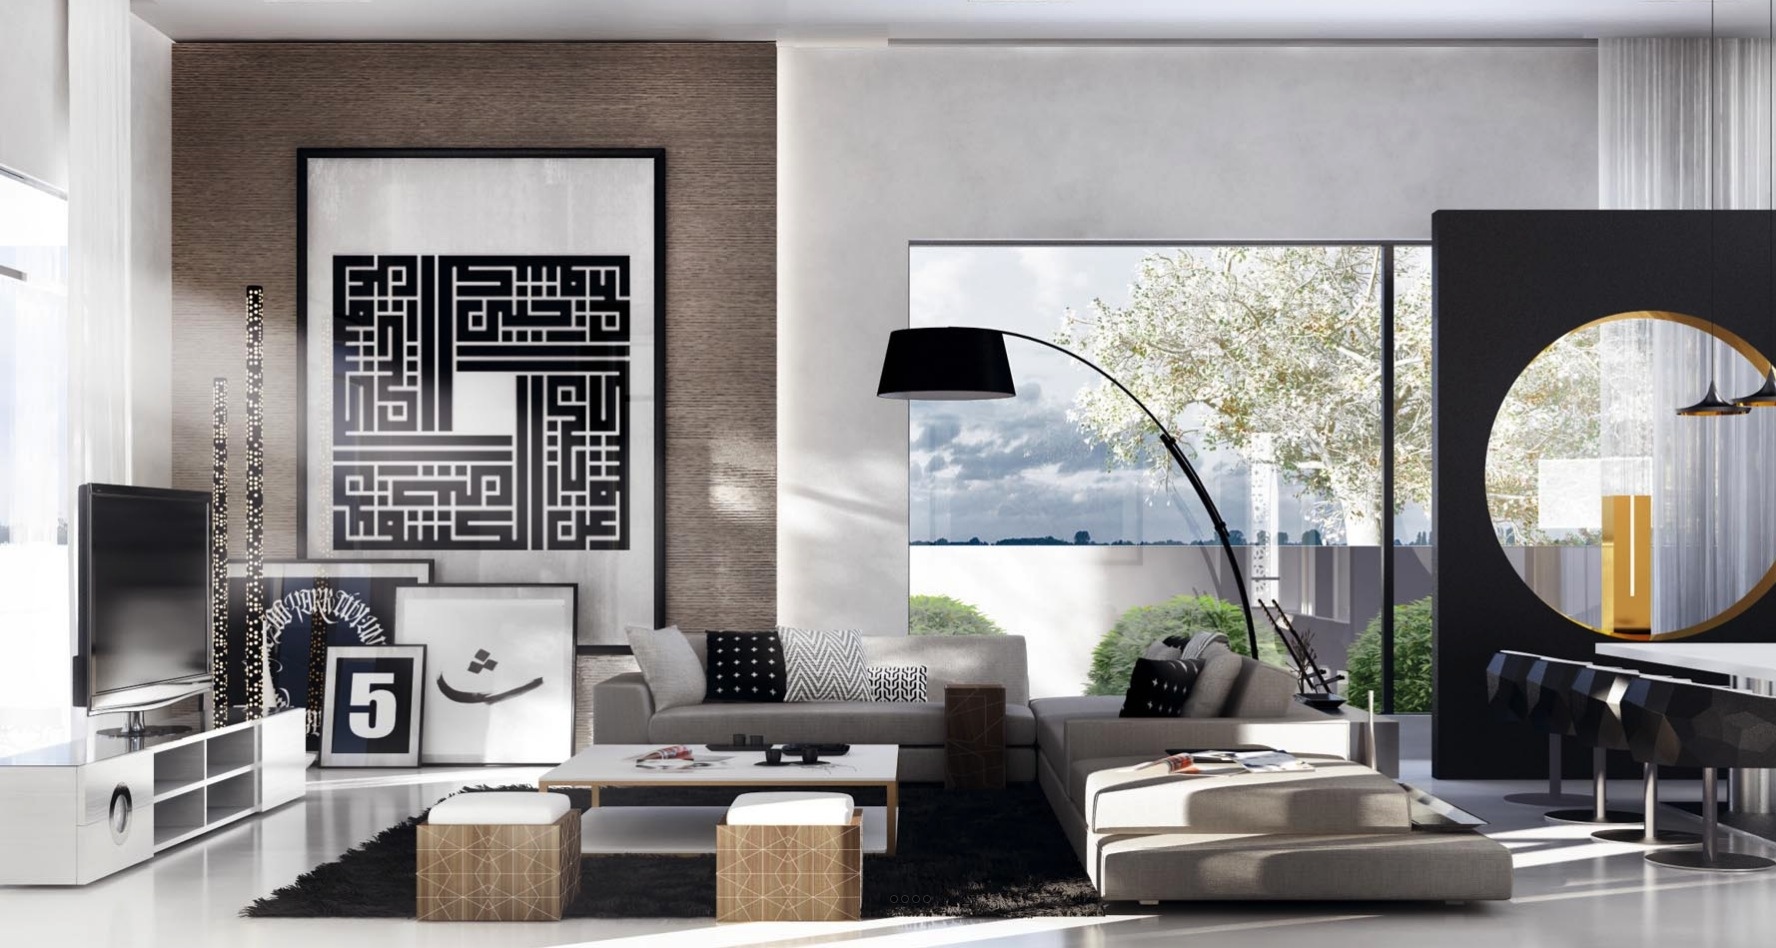 Living room with geometric design "width =" 1776 "height =" 948 "srcset =" https://mileray.com/wp-content/uploads/2020/05/1588517206_577_Decorating-Living-Room-Design-Ideas-With-An-Eclectic-Decor-Looks.jpeg 1776w, https: // myfashionos. com / wp-content / uploads / 2016/08 / Mimar-Interiors3-300x160.jpeg 300w, https://mileray.com/wp-content/uploads/2016/08/Mimar-Interiors3-768x410.jpeg 768w, https: //mileray.com/wp-content/uploads/2016/08/Mimar-Interiors3-1024x547.jpeg 1024w, https://mileray.com/wp-content/uploads/2016/08/Mimar-Interiors3-696x372.jpeg 696w, https://mileray.com/wp-content/uploads/2016/08/Mimar-Interiors3-1068x570.jpeg 1068w, https://mileray.com/wp-content/uploads/2016/08/Mimar-Interiors3 -787x420.jpeg 787w "sizes =" (maximum width: 1776px) 100vw, 1776px